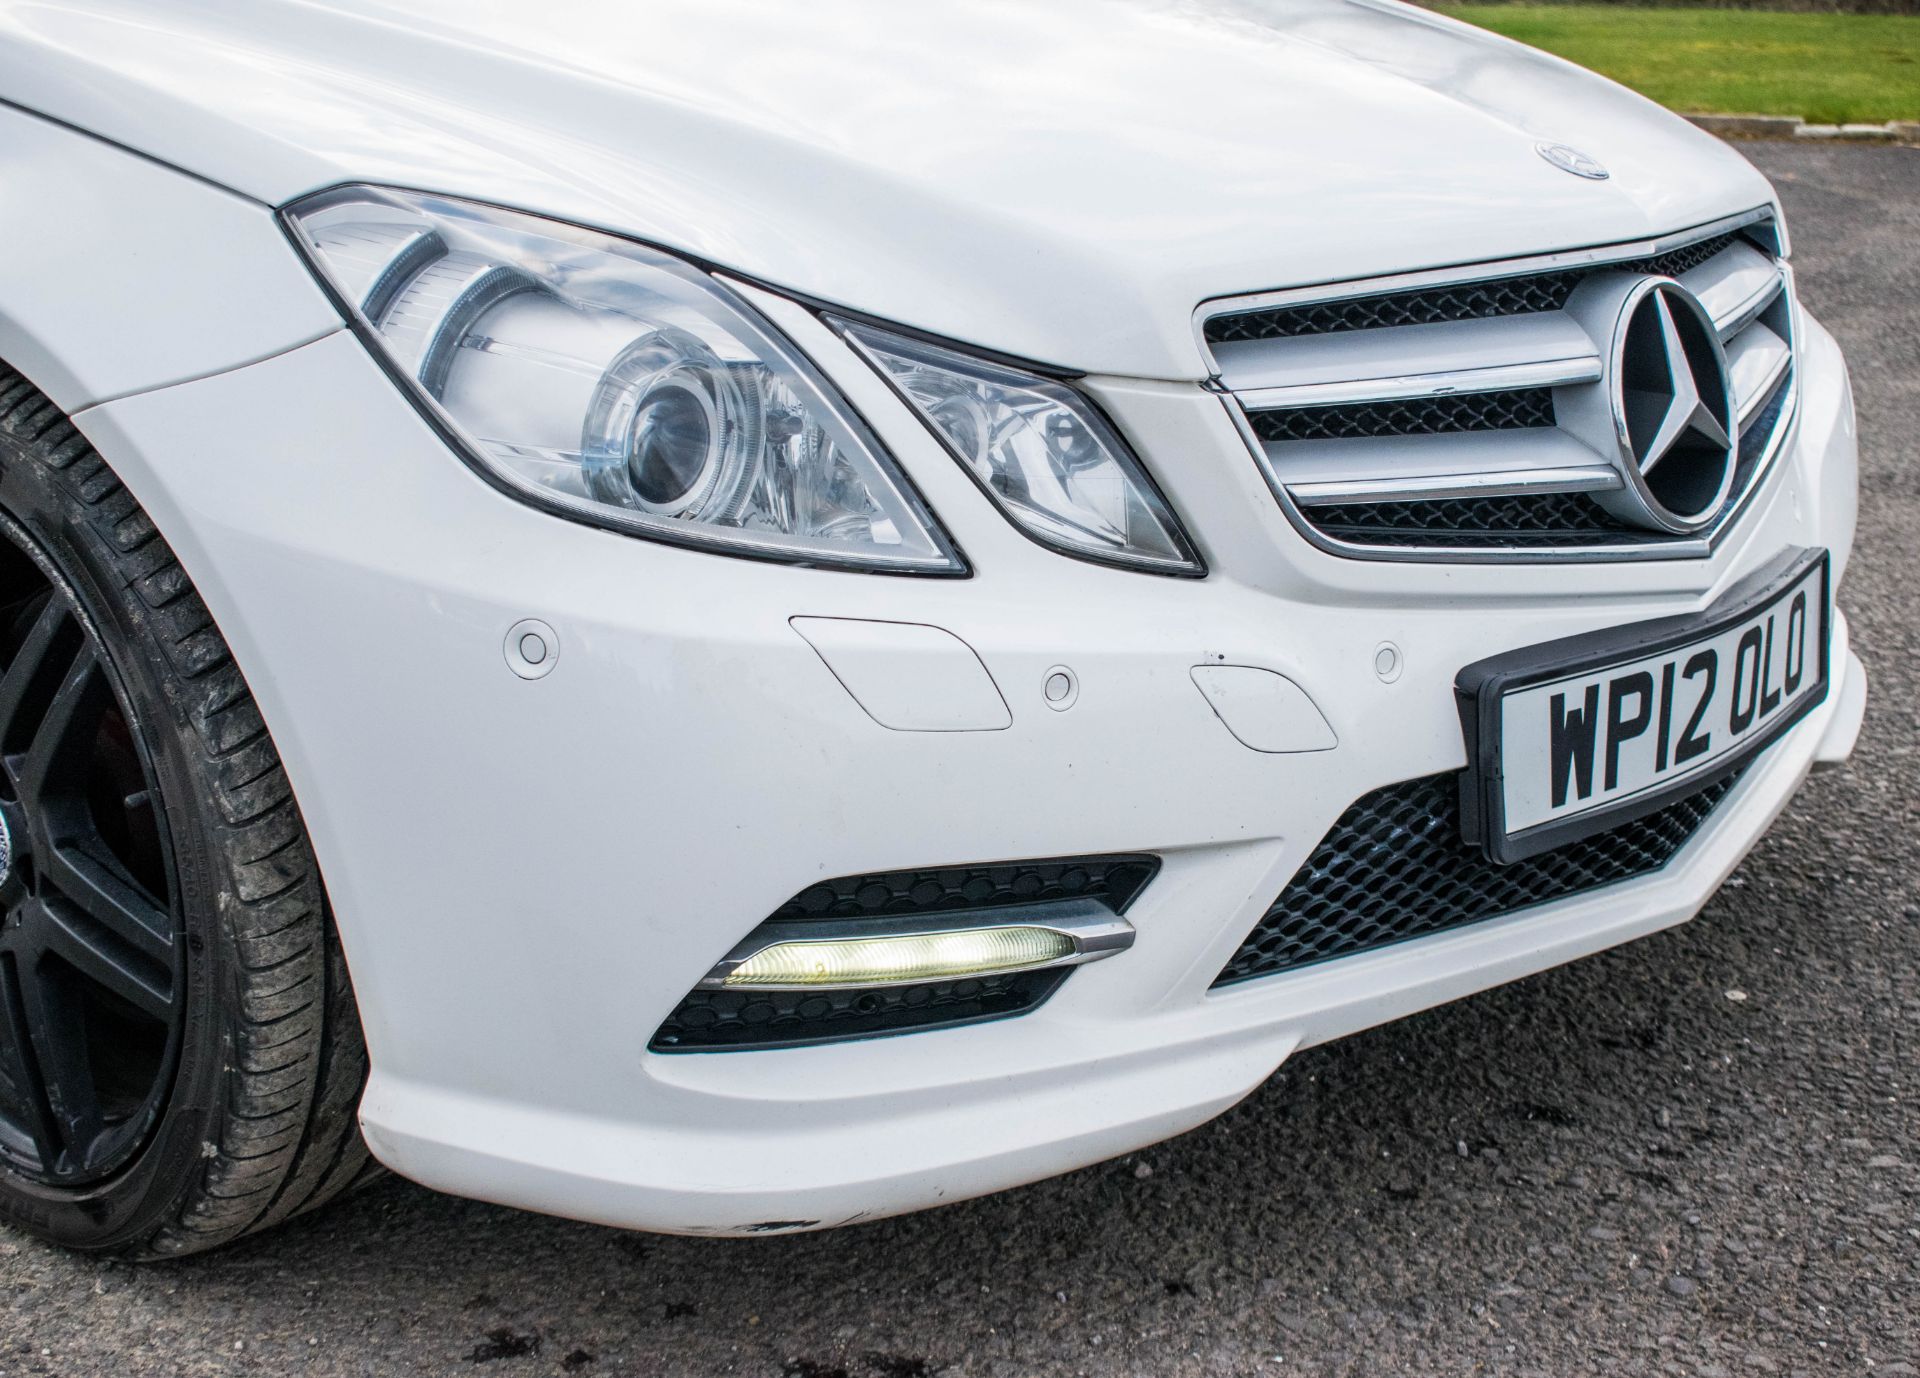 Mercedes Benz E250 sport CDI diesel convertible car Registration number: WP12 OLO Date of - Image 14 of 20